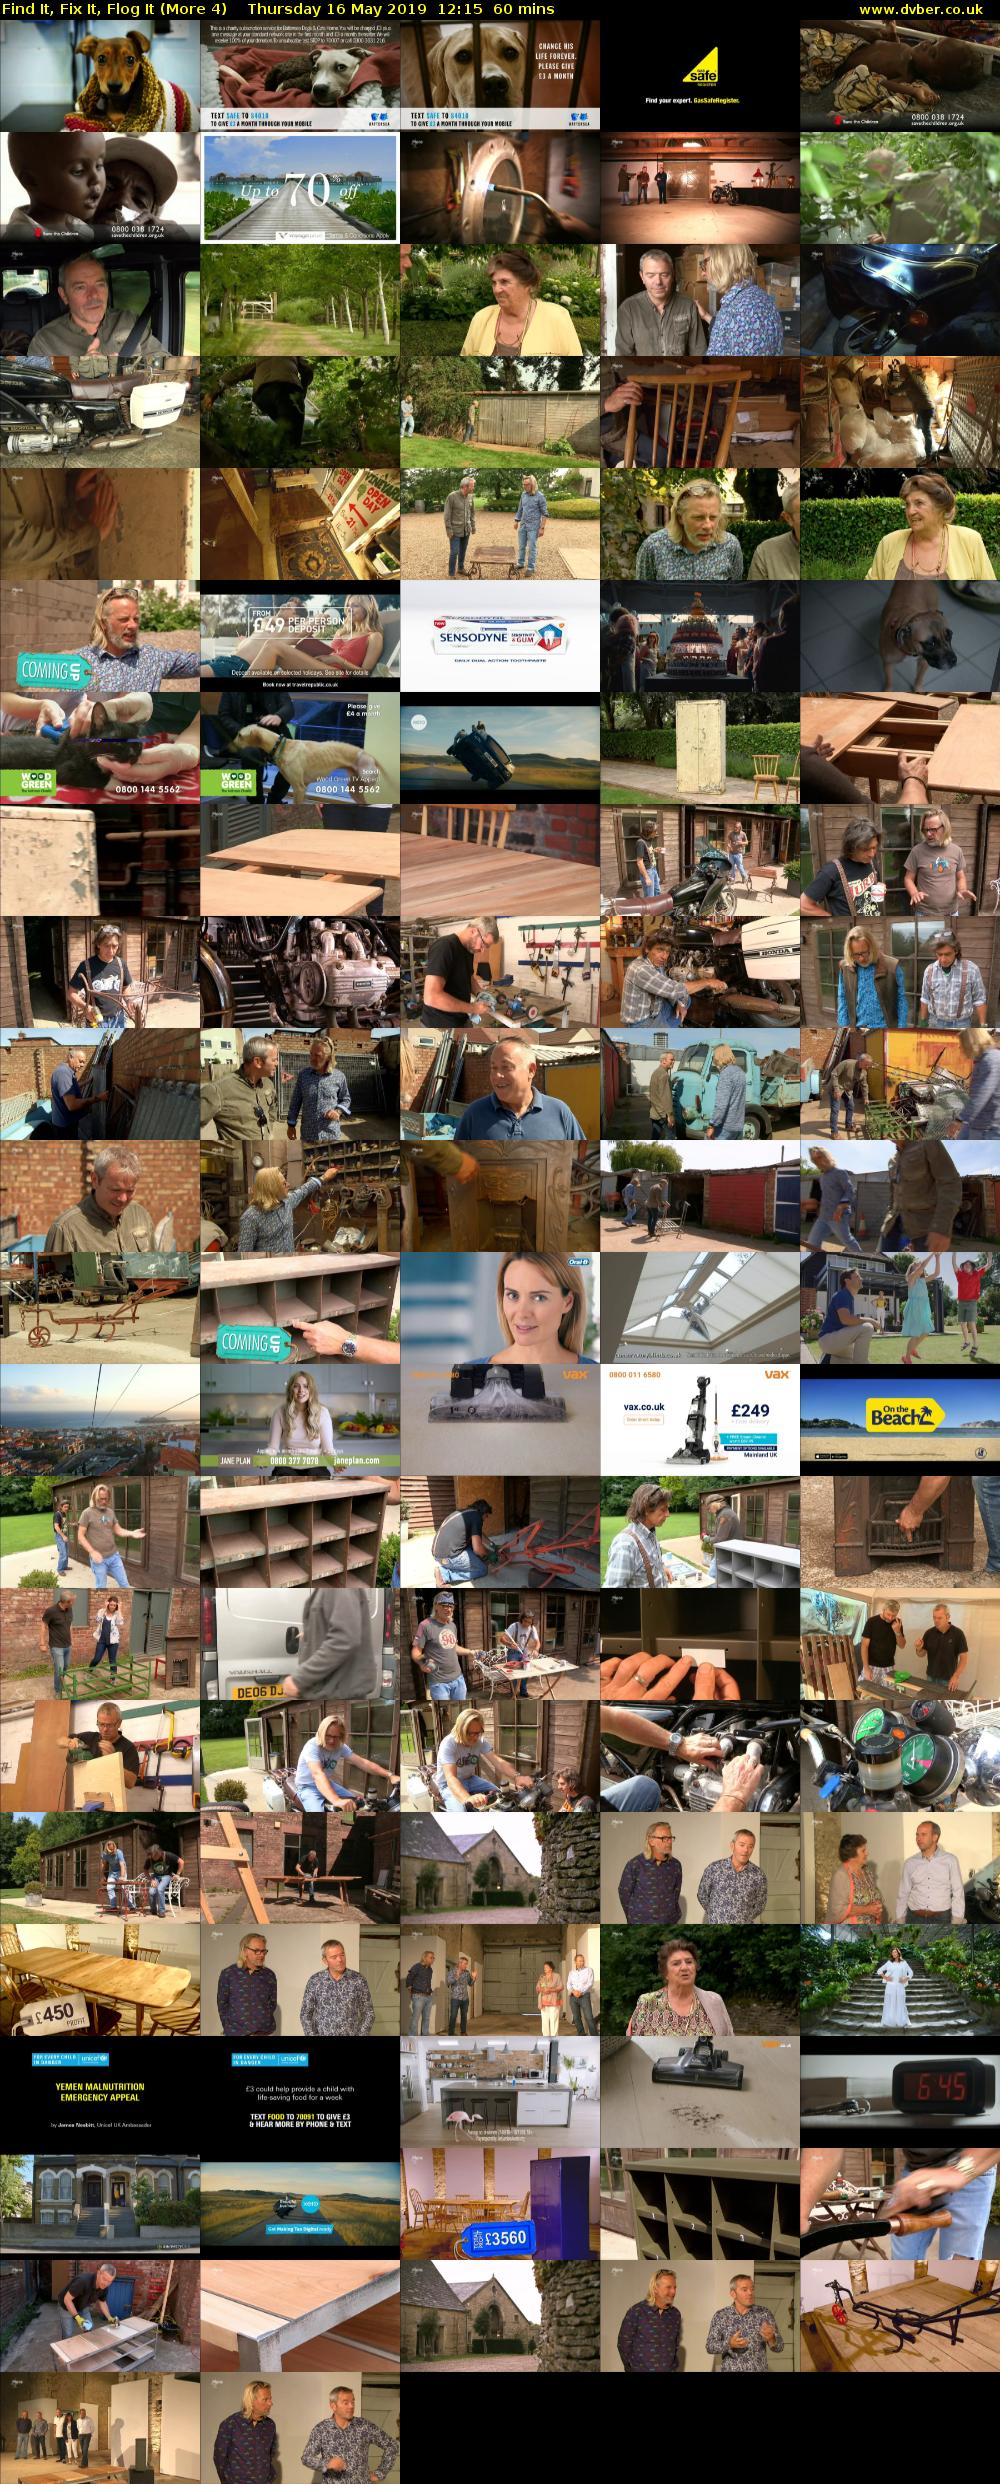 Find It, Fix It, Flog It (More 4) Thursday 16 May 2019 12:15 - 13:15